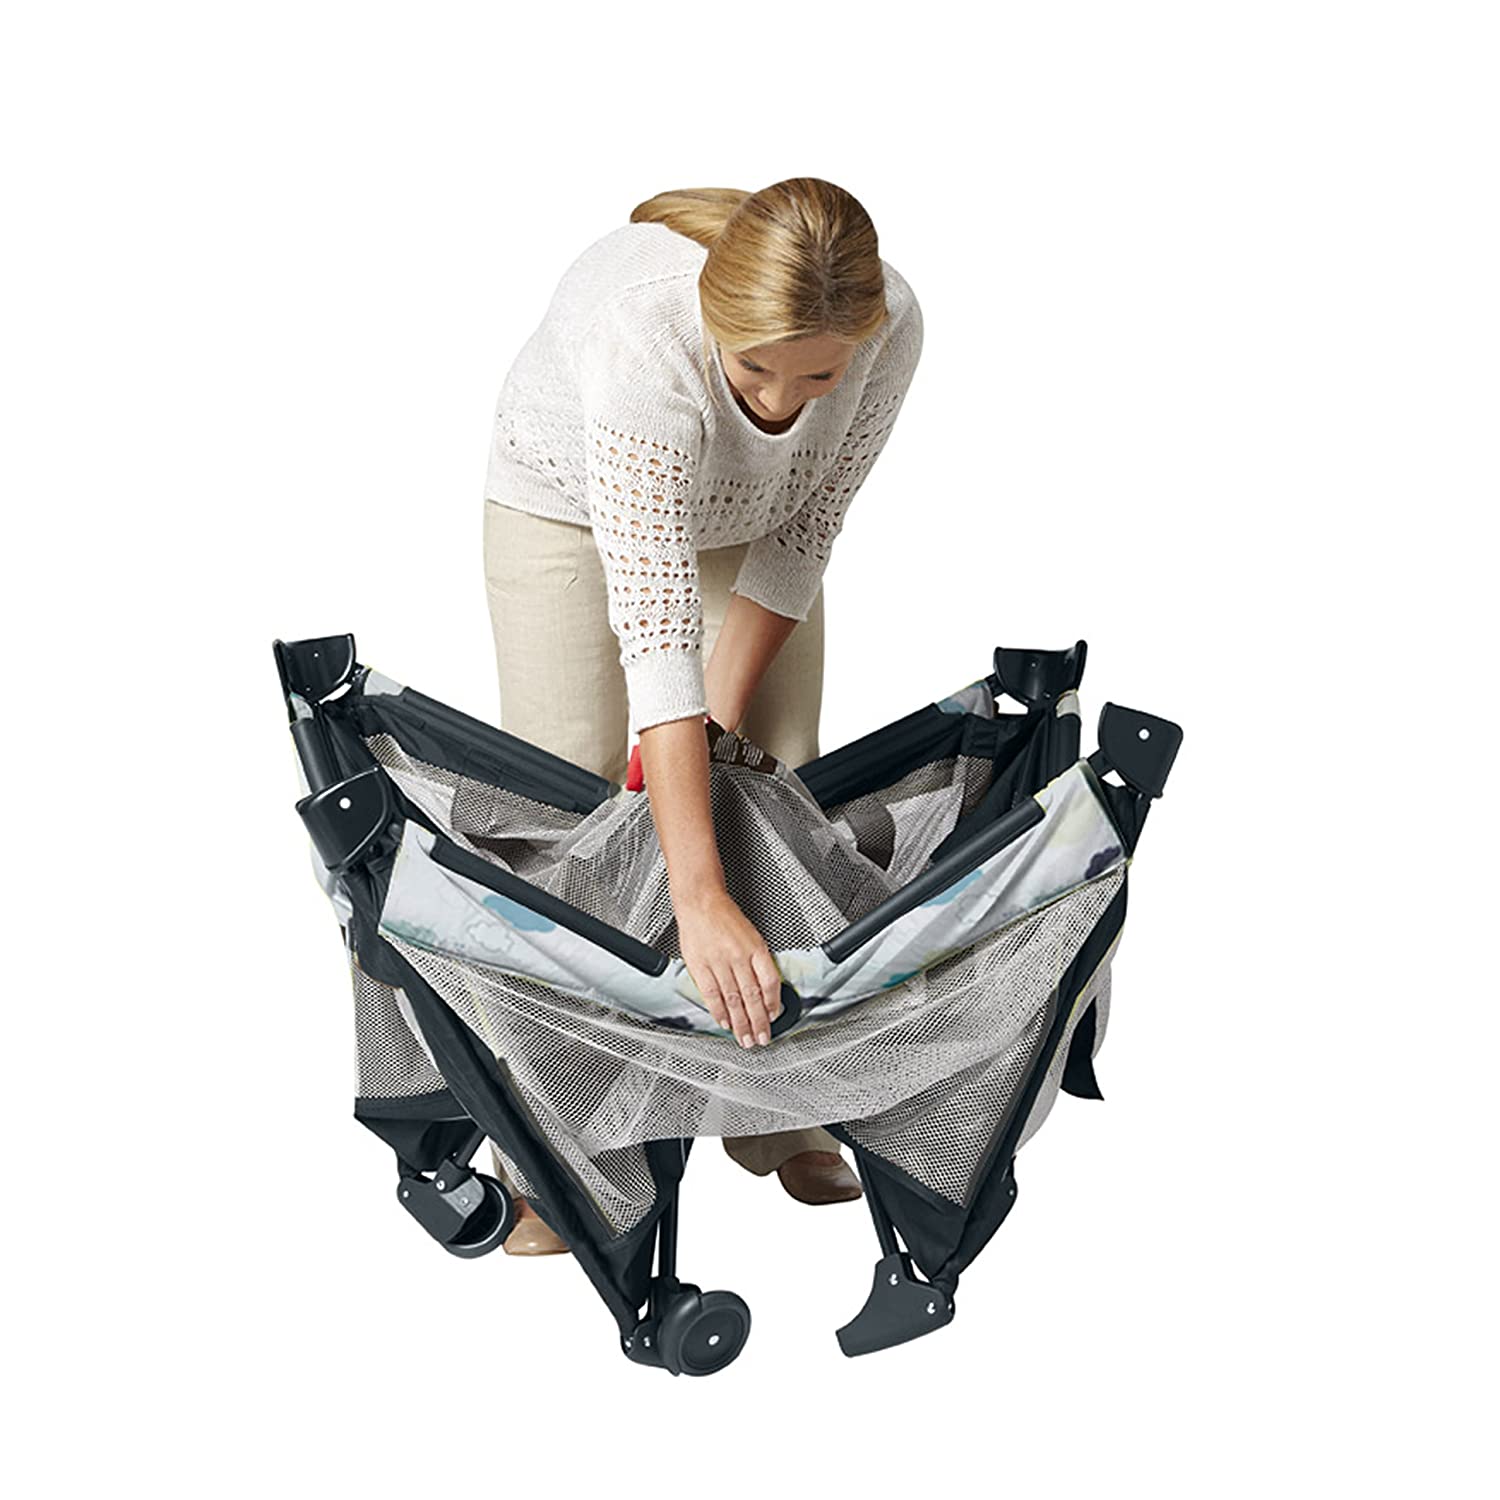 Graco Pack N Play On The Go Playard Stratus For A Comfortable Little One - 1927561